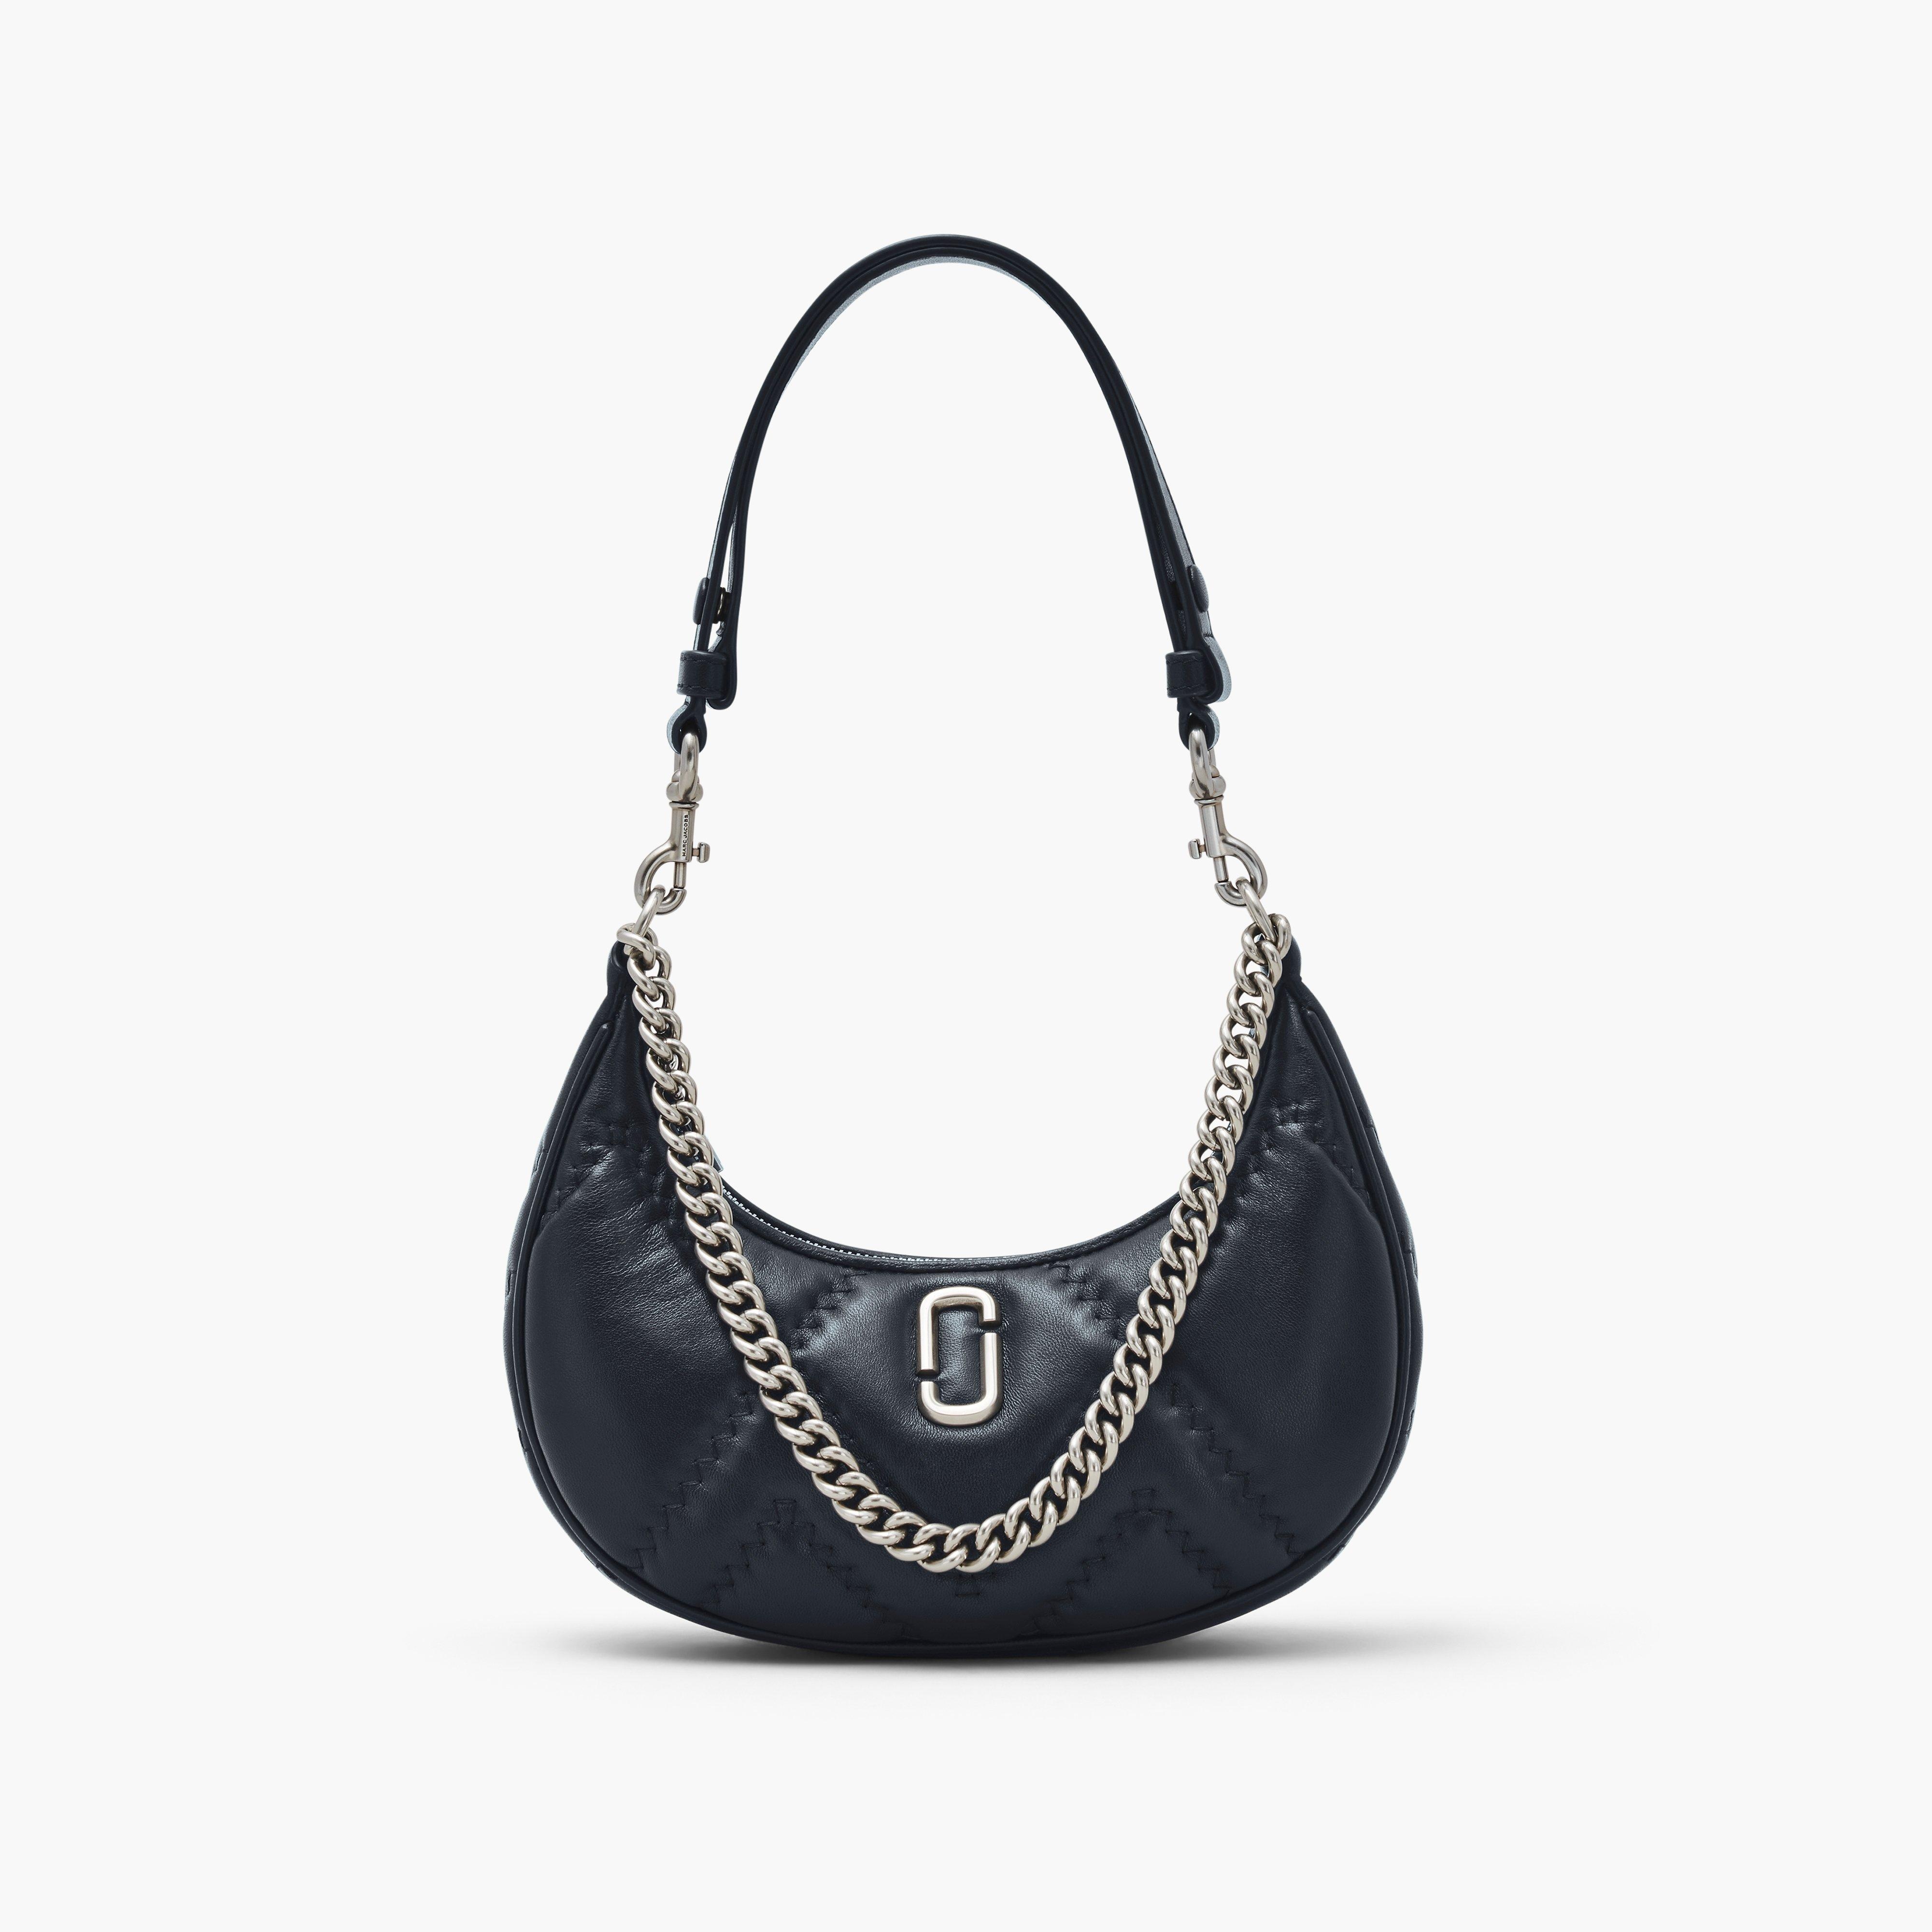 THE QUILTED LEATHER J MARC CURVE BAG - 1